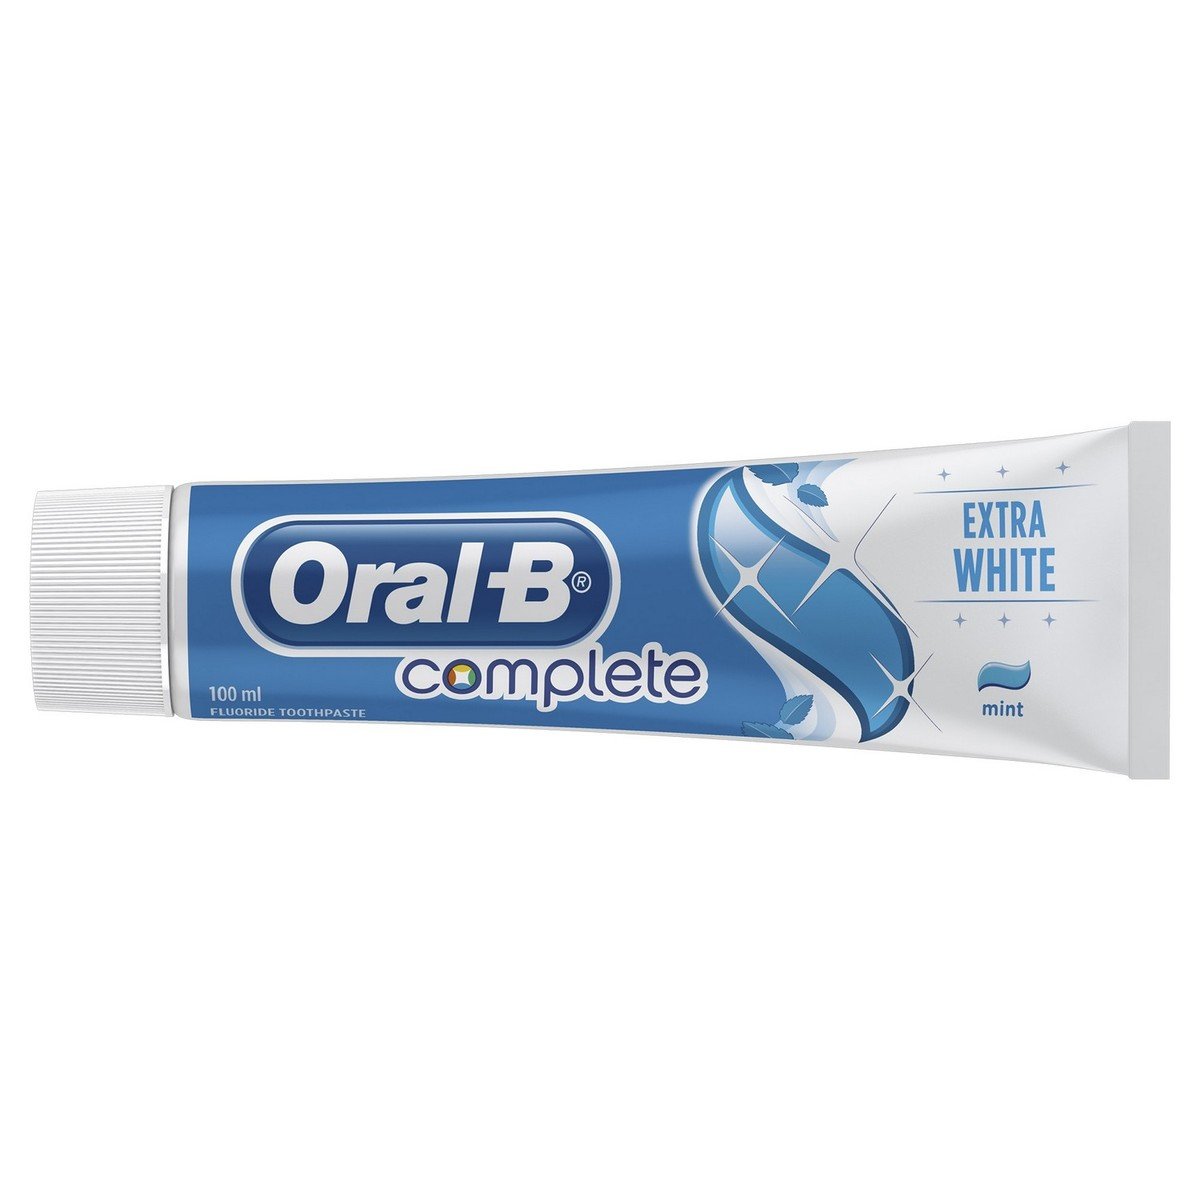 Oral-B Complete Extra White 100 ml